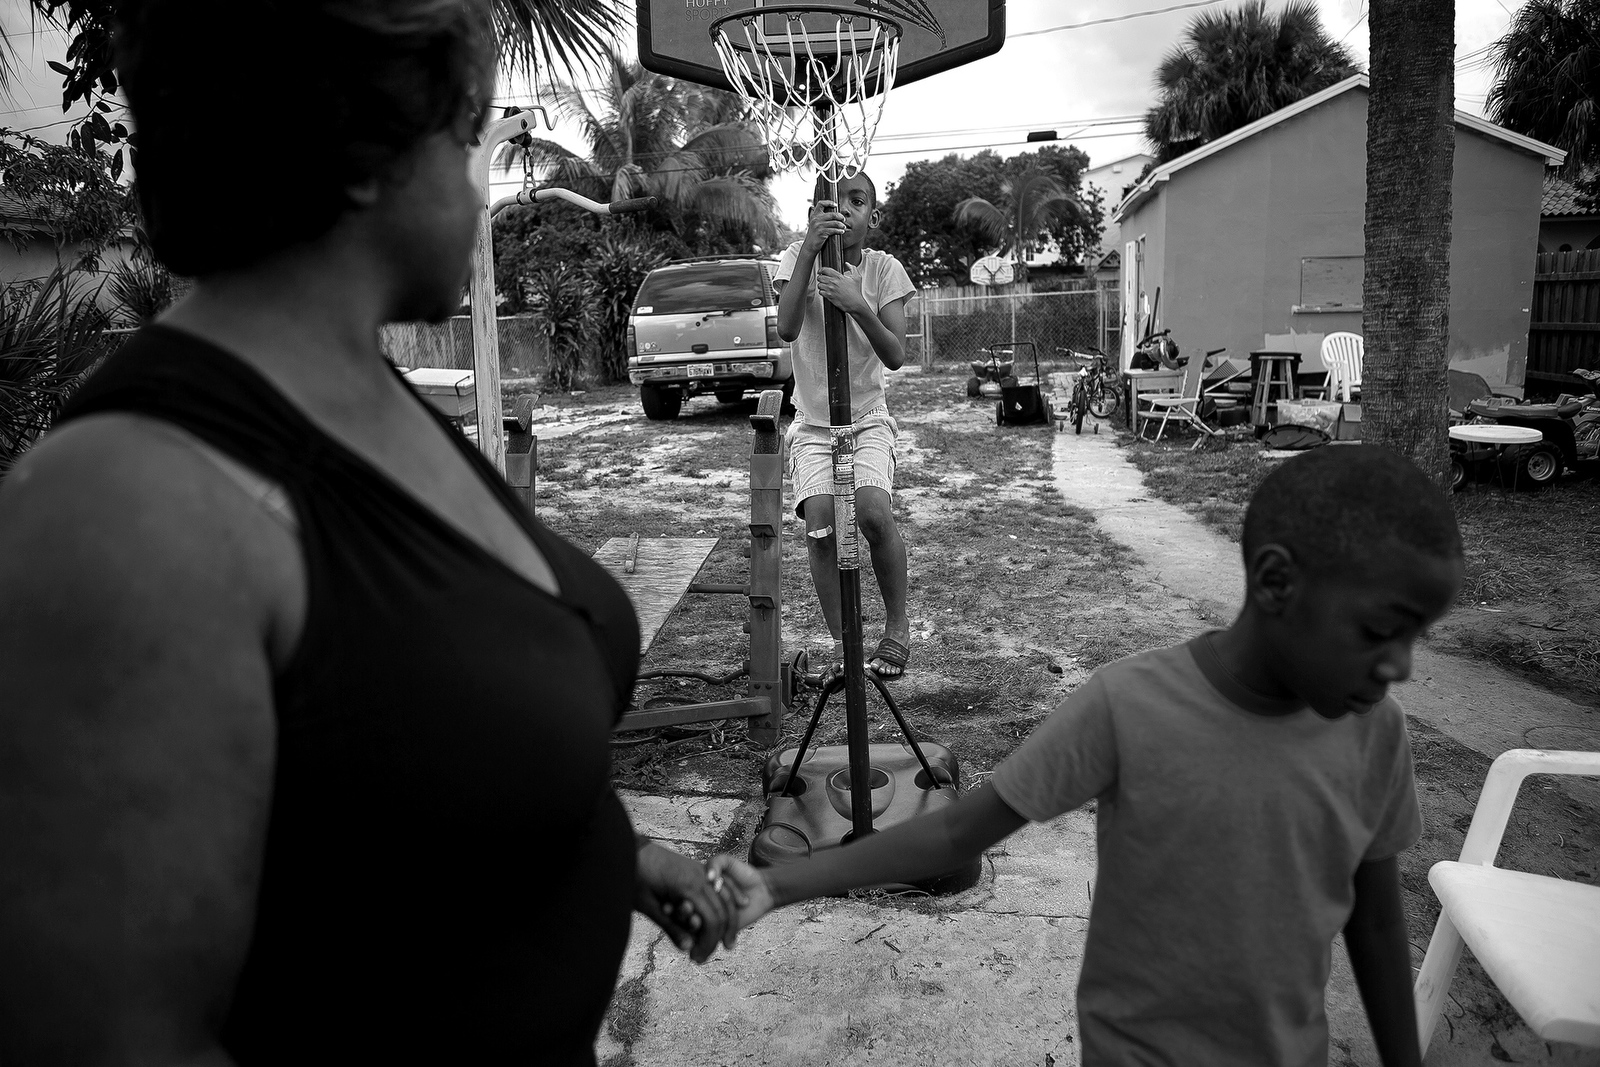  Omari Tripp, 8, climbs up the basketball hoop in his backyard as his brother Odarius, 6, pulls their mother Angeline back inside. Both Omari and Odarius have severe autism and require nearly constant supervision.&nbsp; 